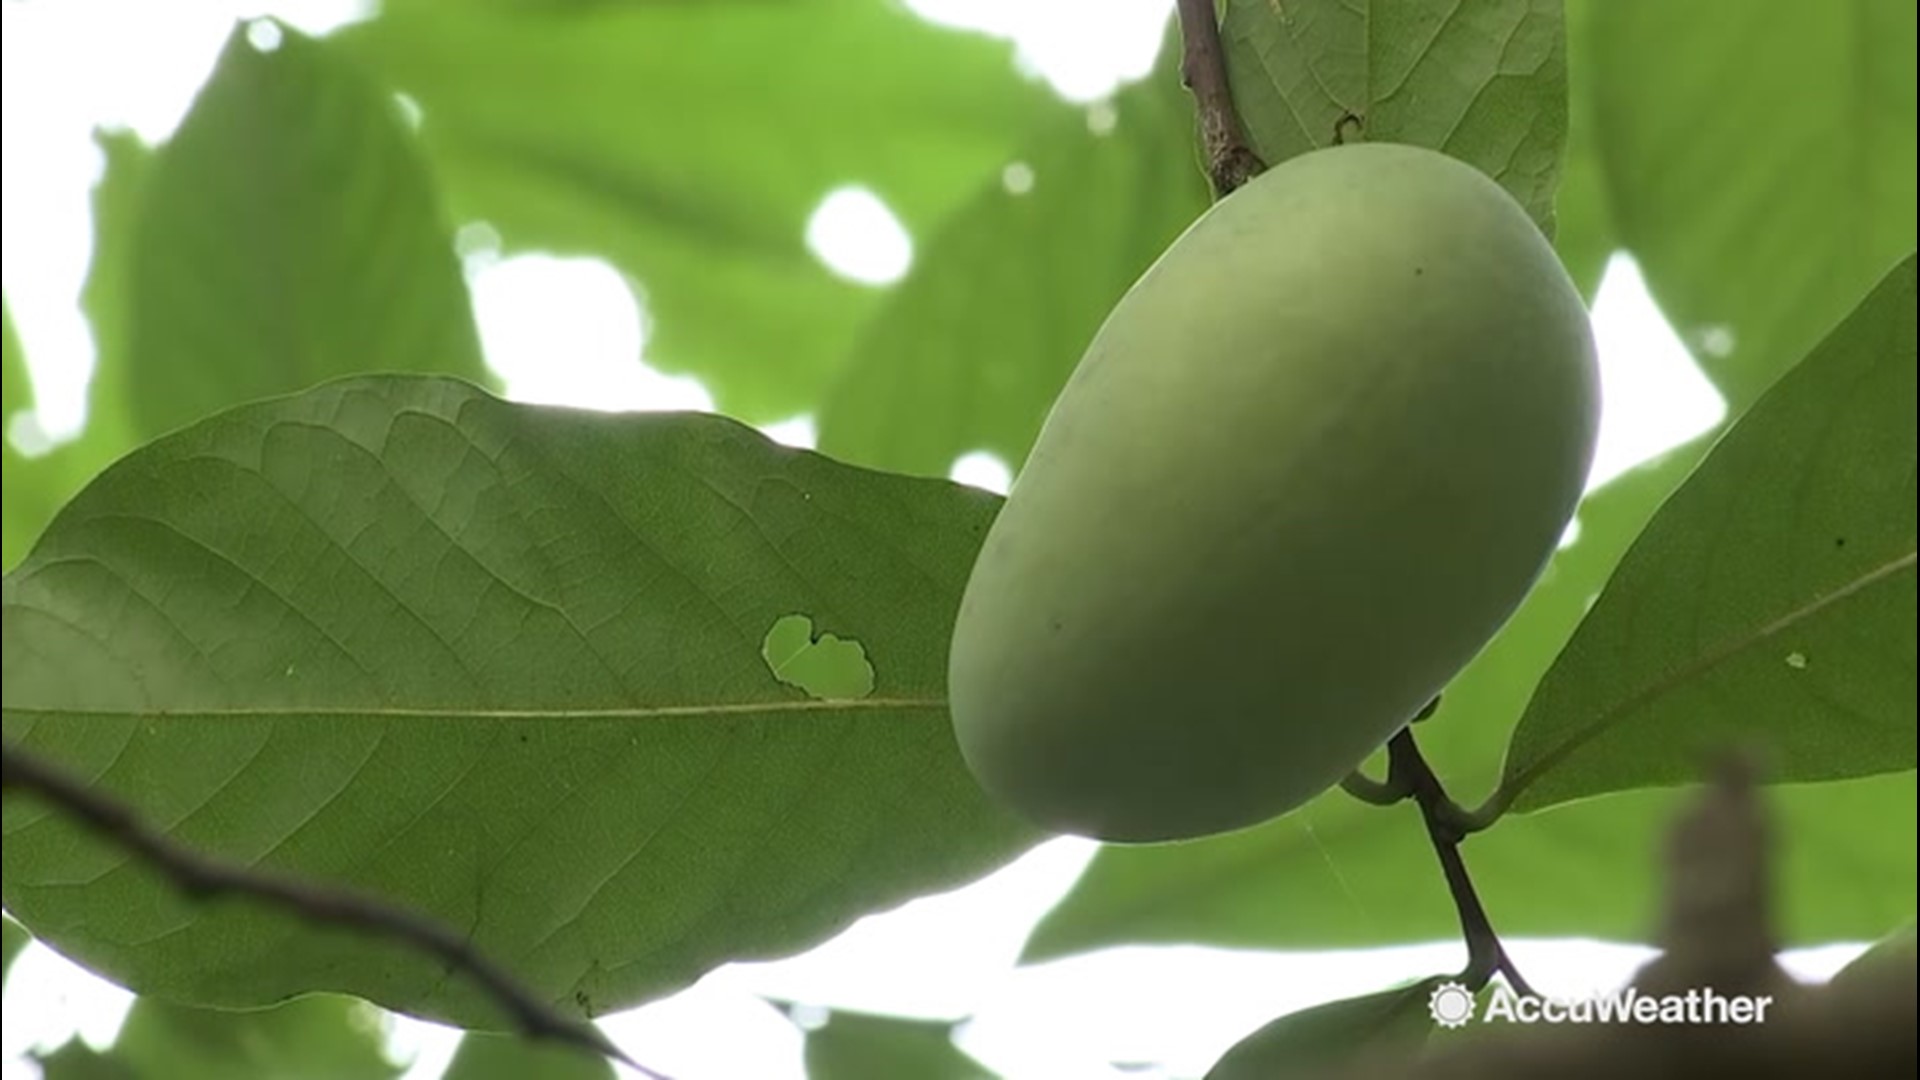 On Oct. 10, conditions were just right to help pawpaws rippen to their fullest. It's peak growing season for the fruit, which is native to places like Kalamazoo County, Michigan, seen here.